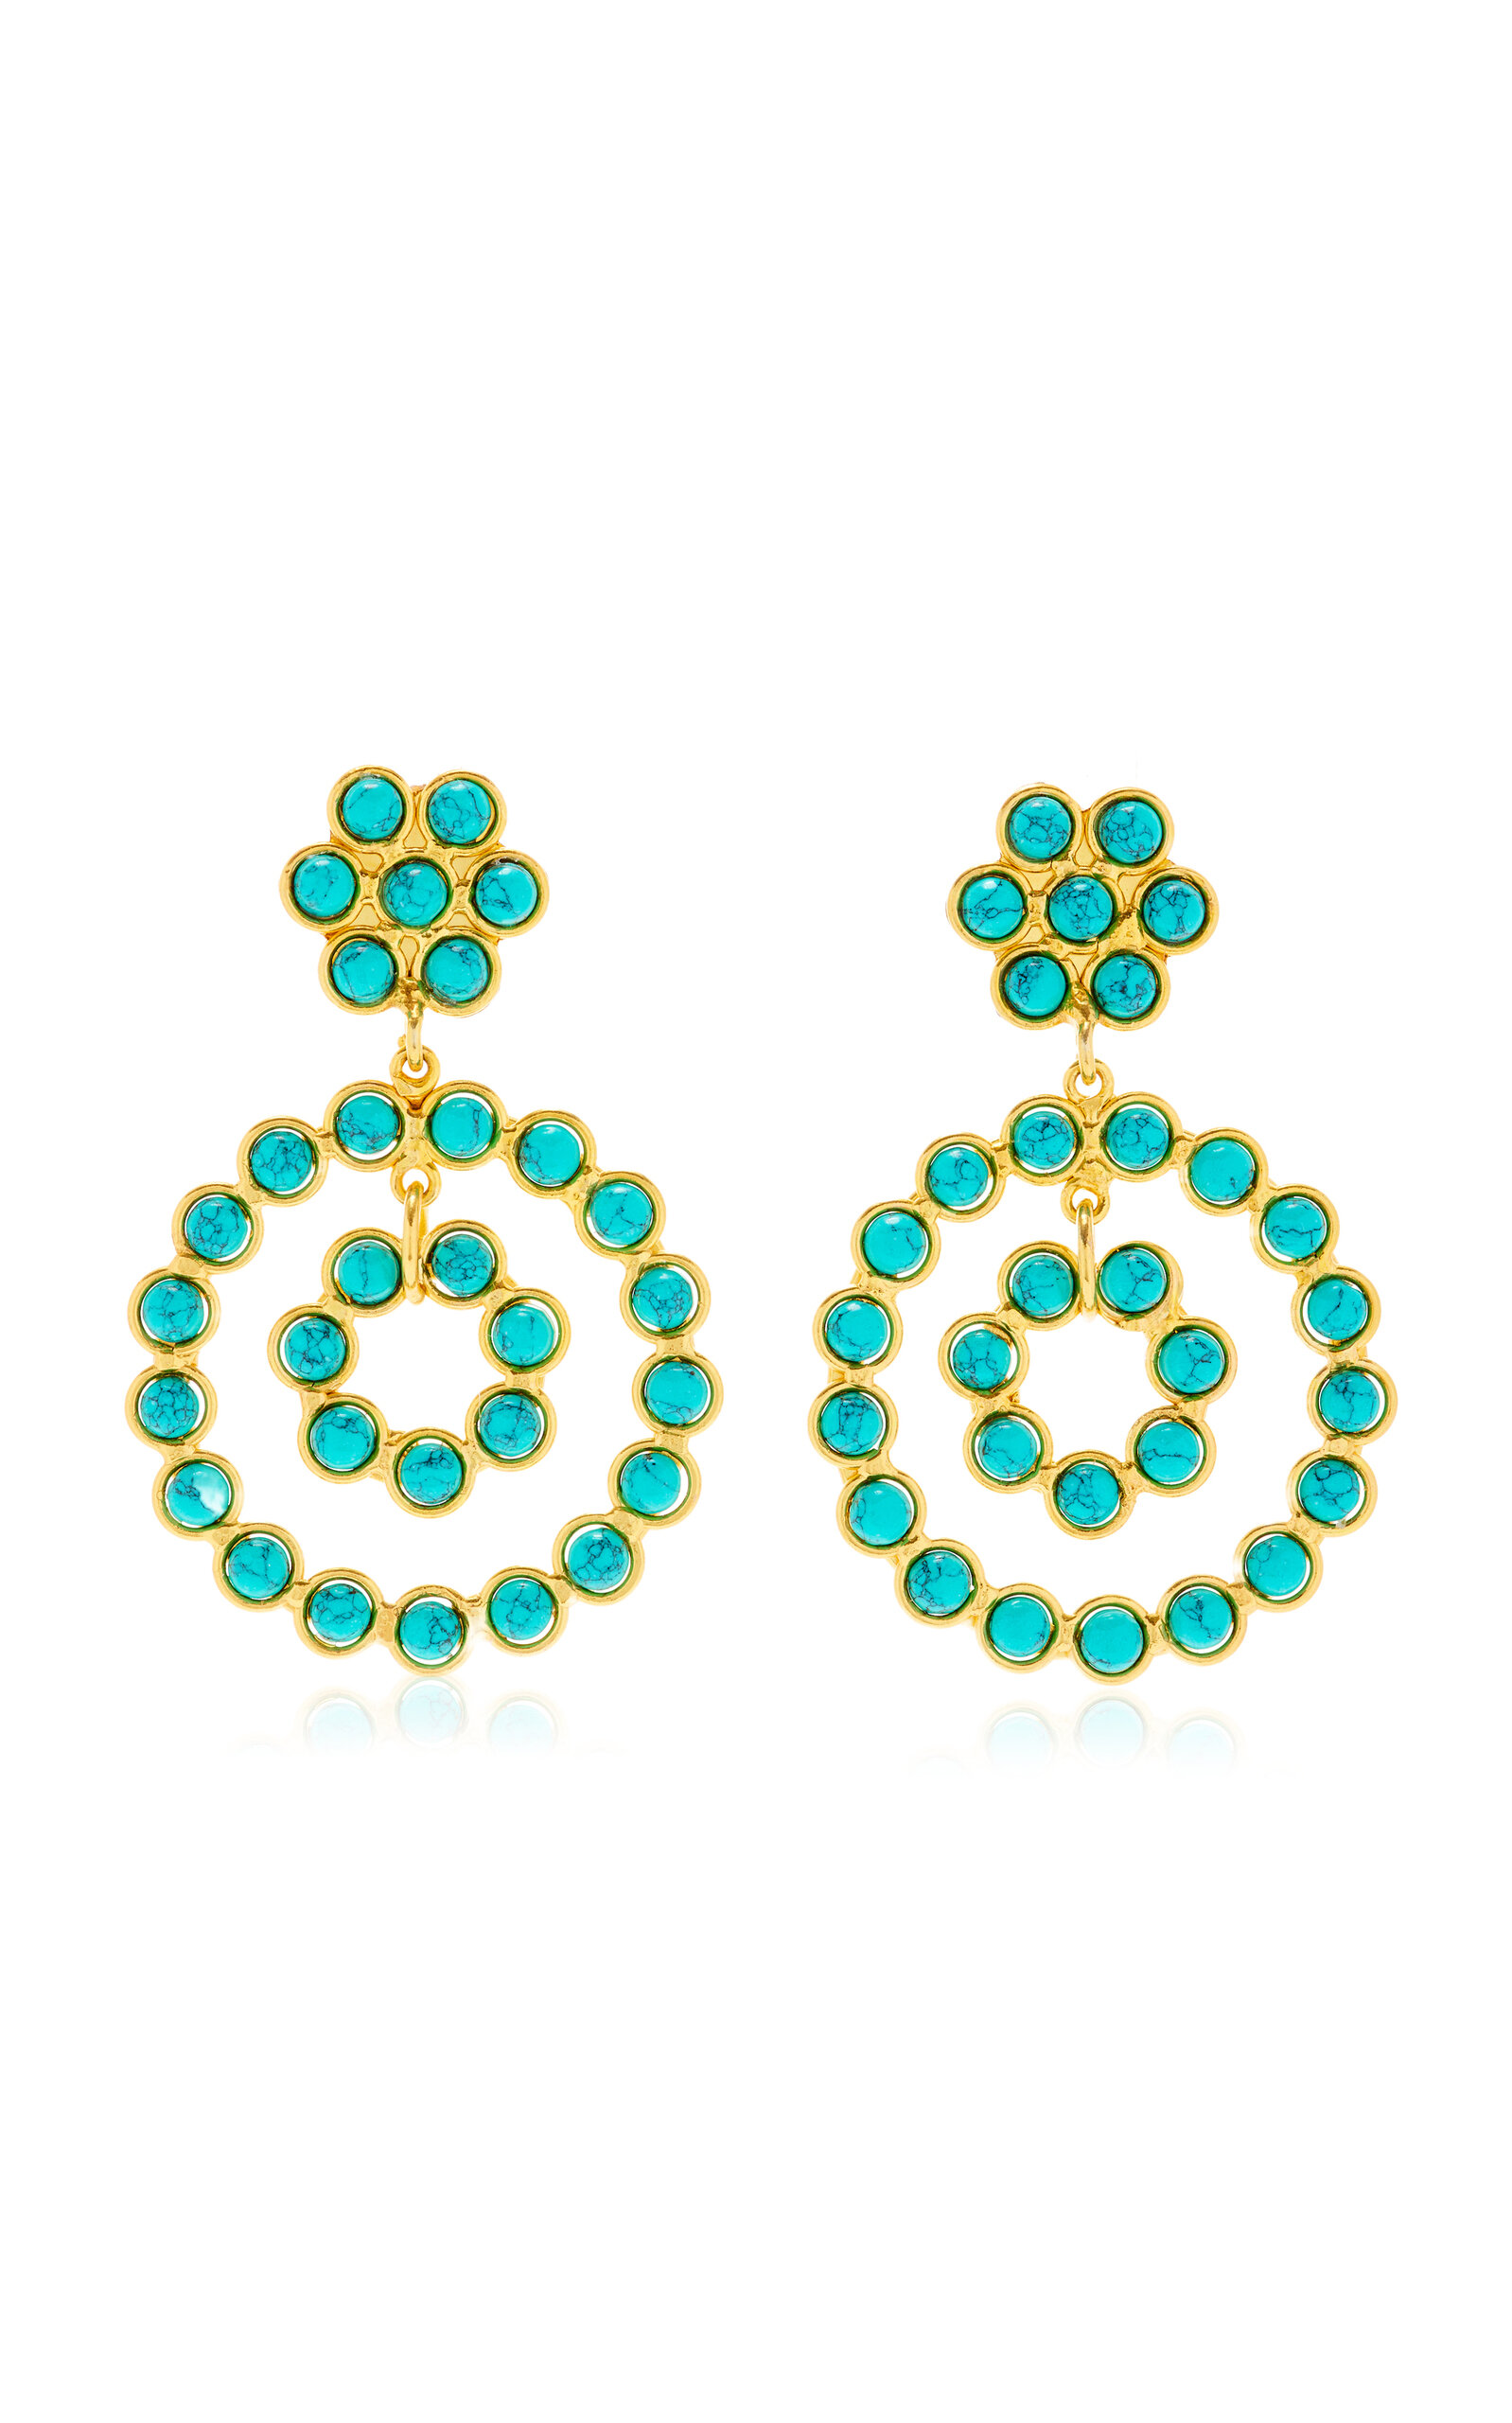 Happy Flower 22K Gold-Plated Turquoise Earrings